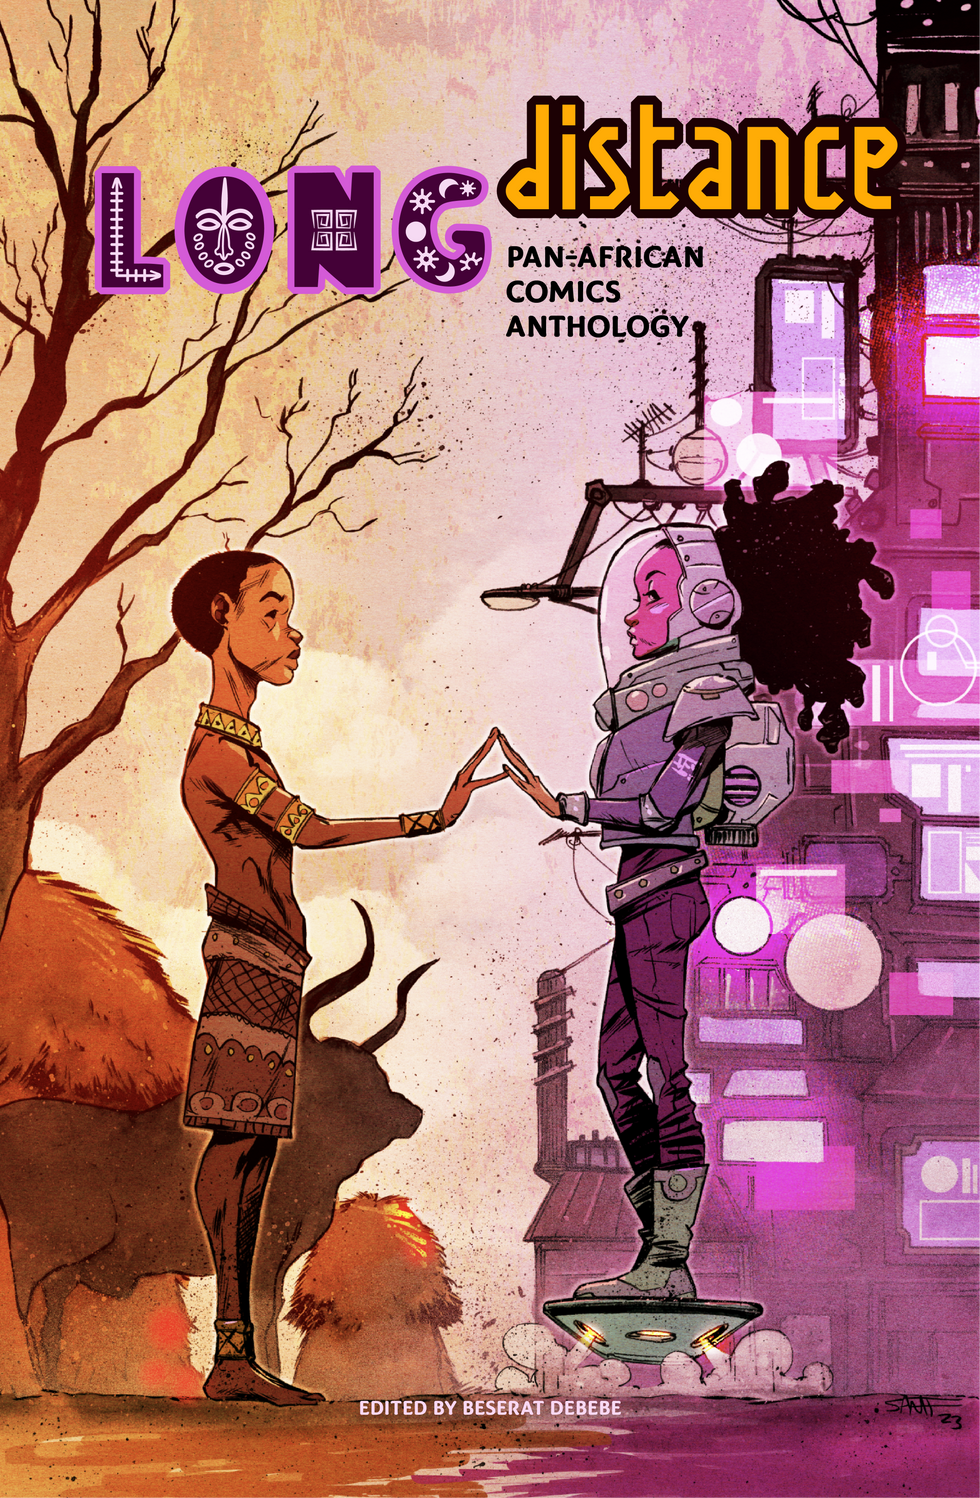 An image of the comic book anthology's cover of two people, one is a rural person, the other a more futuristic one.